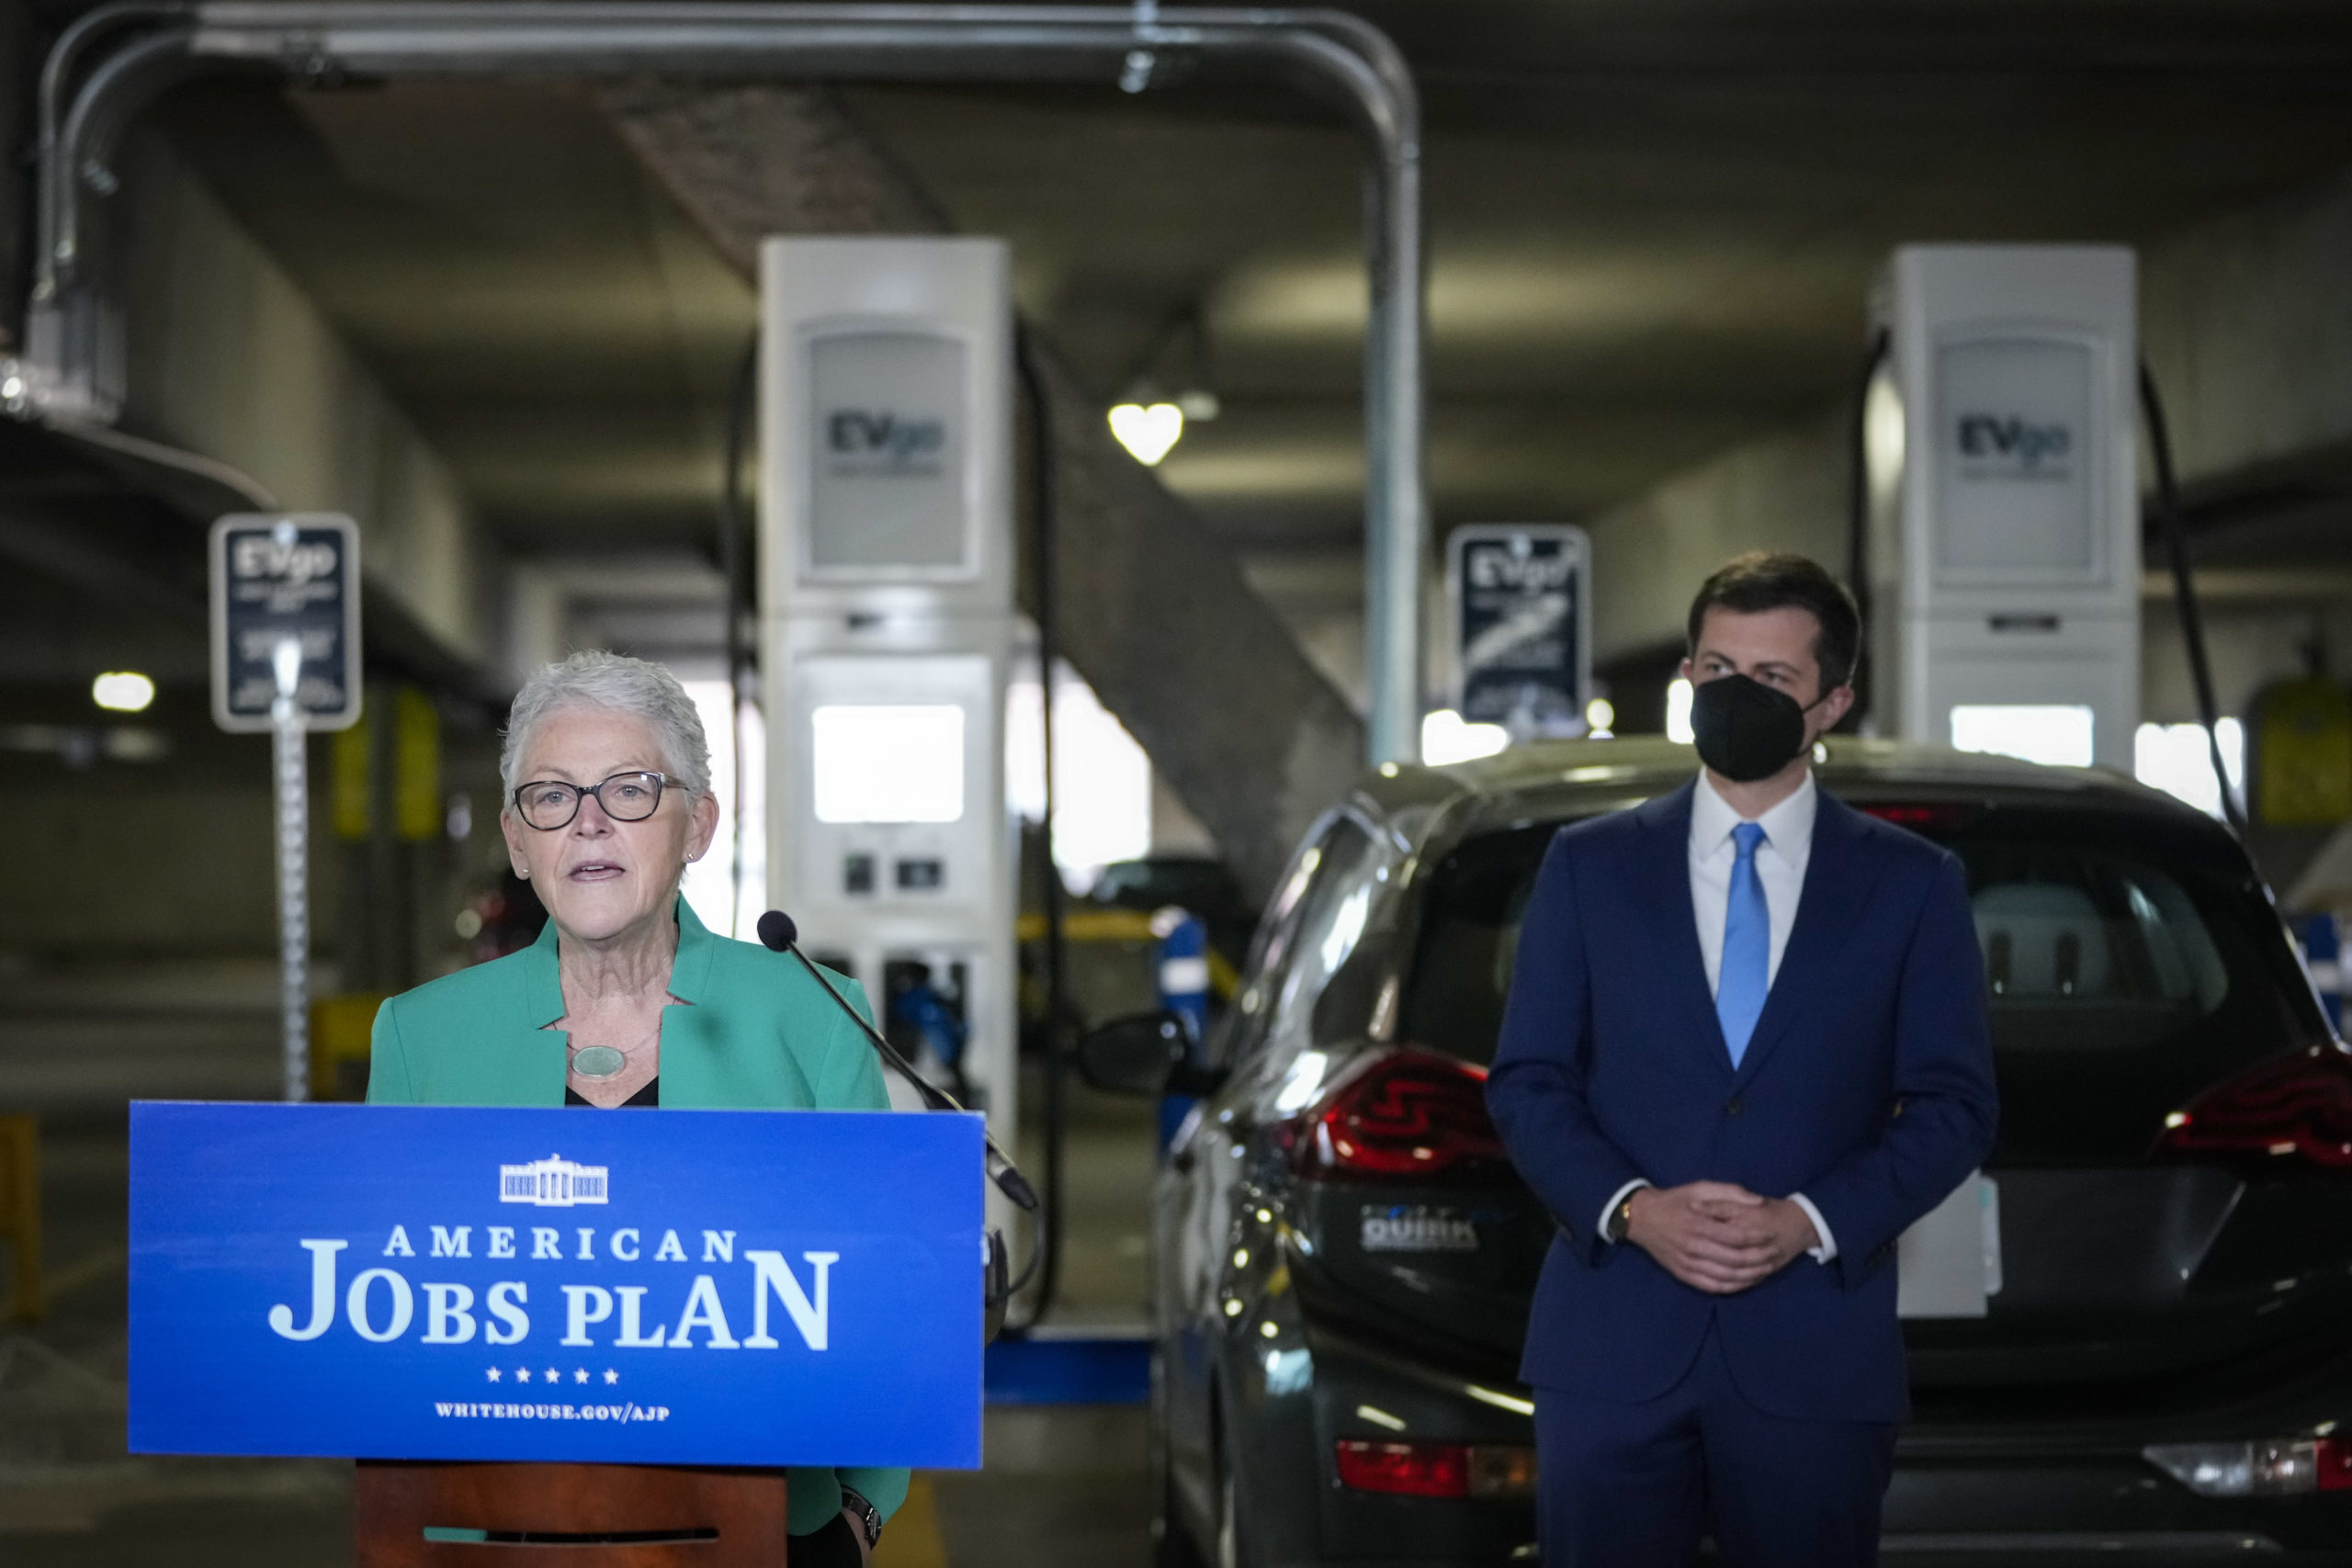 WASHINGTON, DC - APRIL 22: (L-R) White House Climate Adviser Gina McCarthy and U.S. Secretary of Transportation Pete Buttigieg hold a news conference about the American Jobs Plan and to highlight electric vehicles at Union Station near Capitol Hill on April 22, 2021 in Washington, DC. The Biden administration has proposed over $170 billion in spending to boost the production of zero-emission buses and cars and increase the number of EV charging stations. (Photo by Drew Angerer/Getty Images)